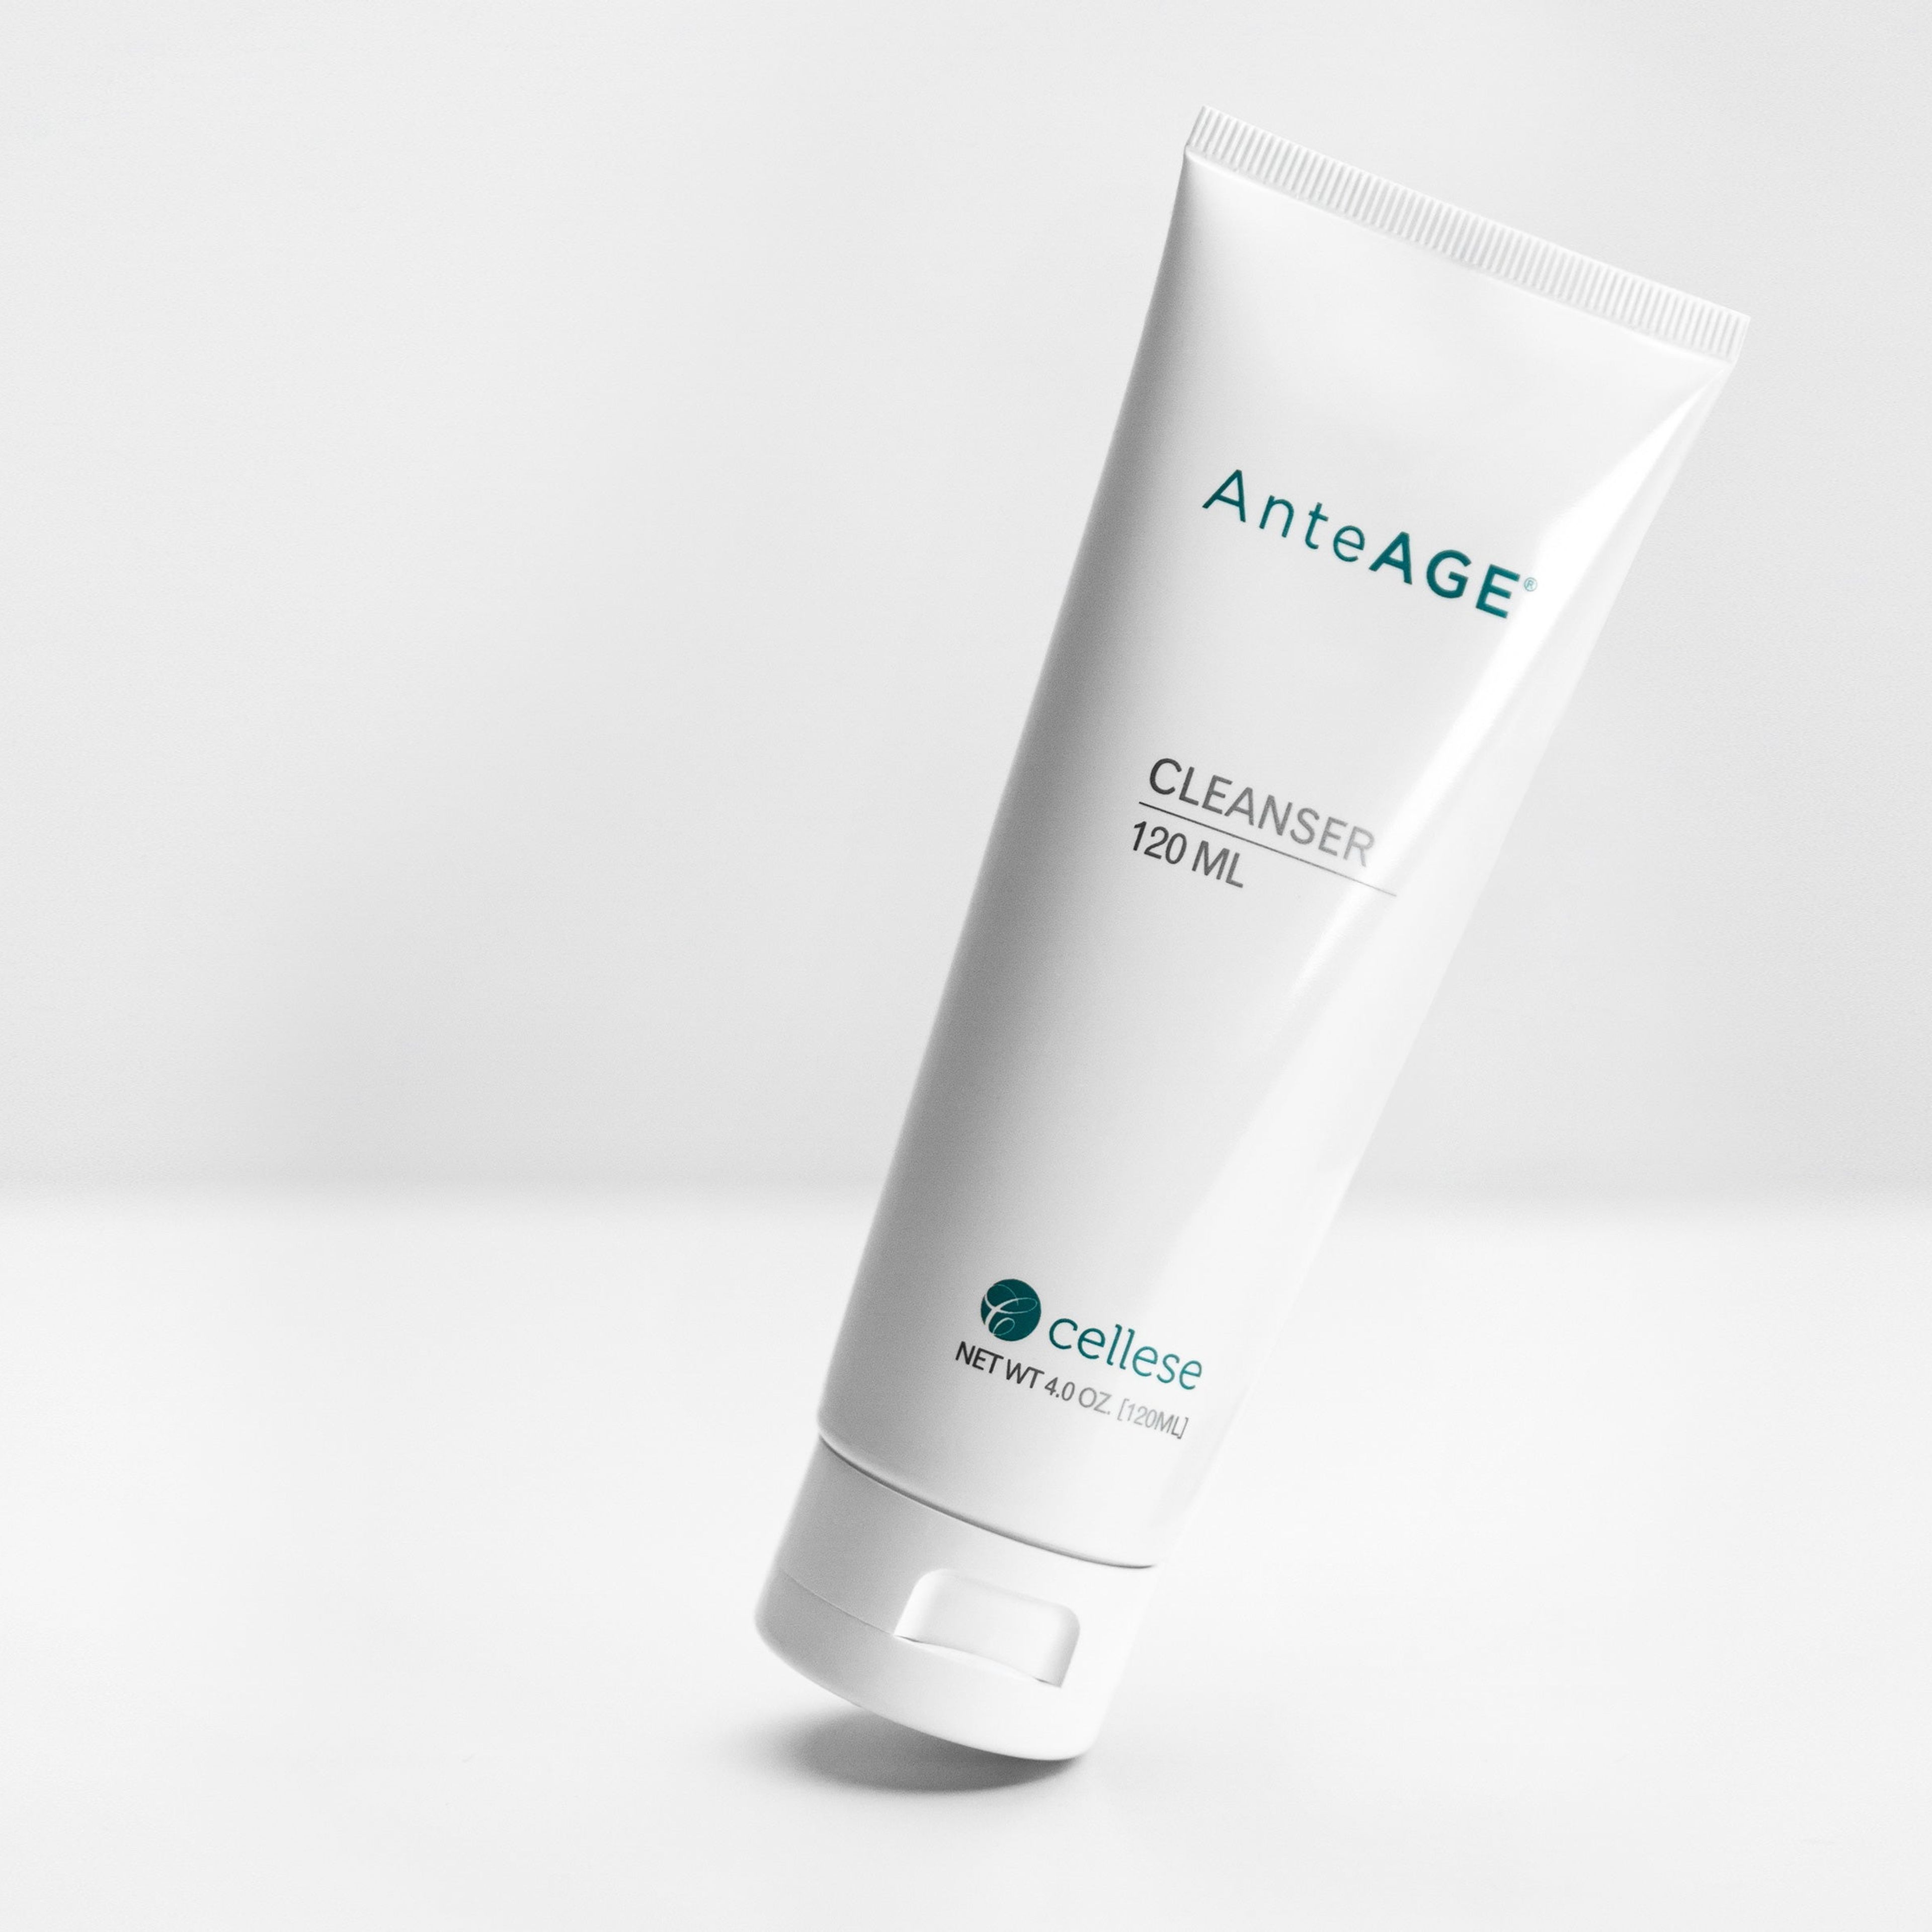 AnteAGE Cleanser (120ml)